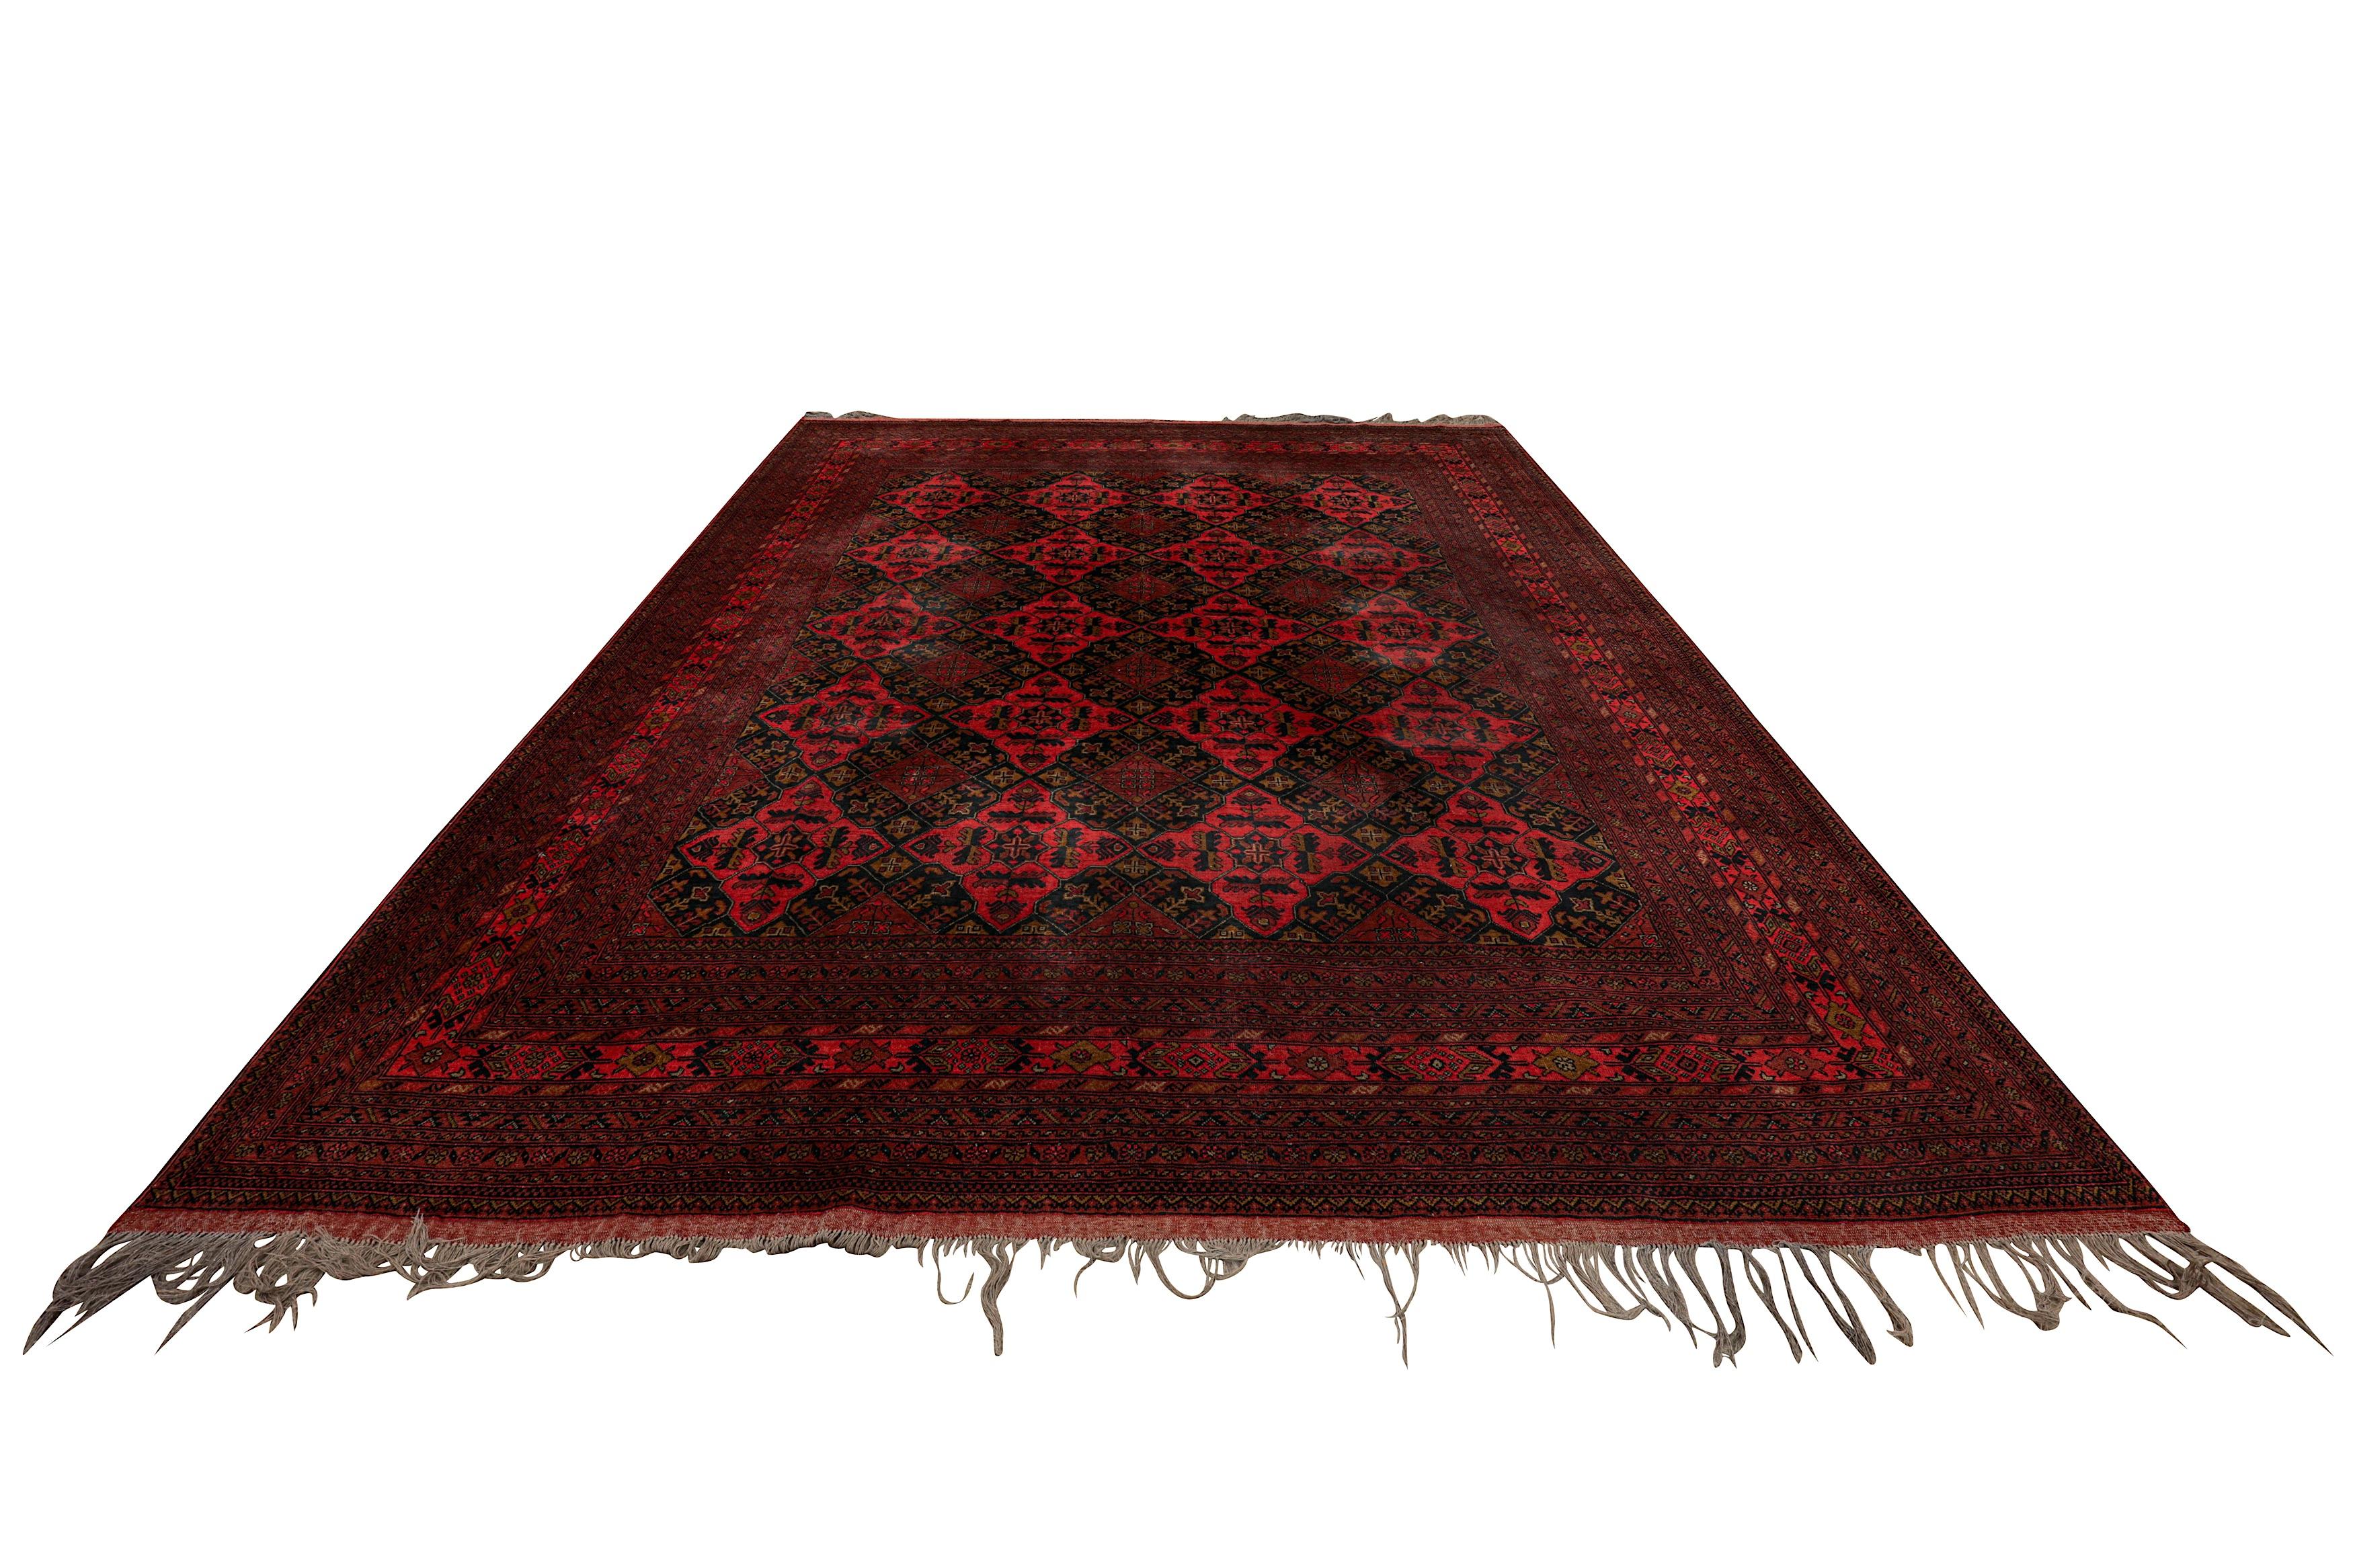 Mid century hand knotted Afghan Khan wool carpet 13ft x 10ft

An Afghan Turkmen carpet
C.1940
Measures: Approx: 386cm. x 306cm. 

This 13 x 10 ft rug is referred to as an oversized or 